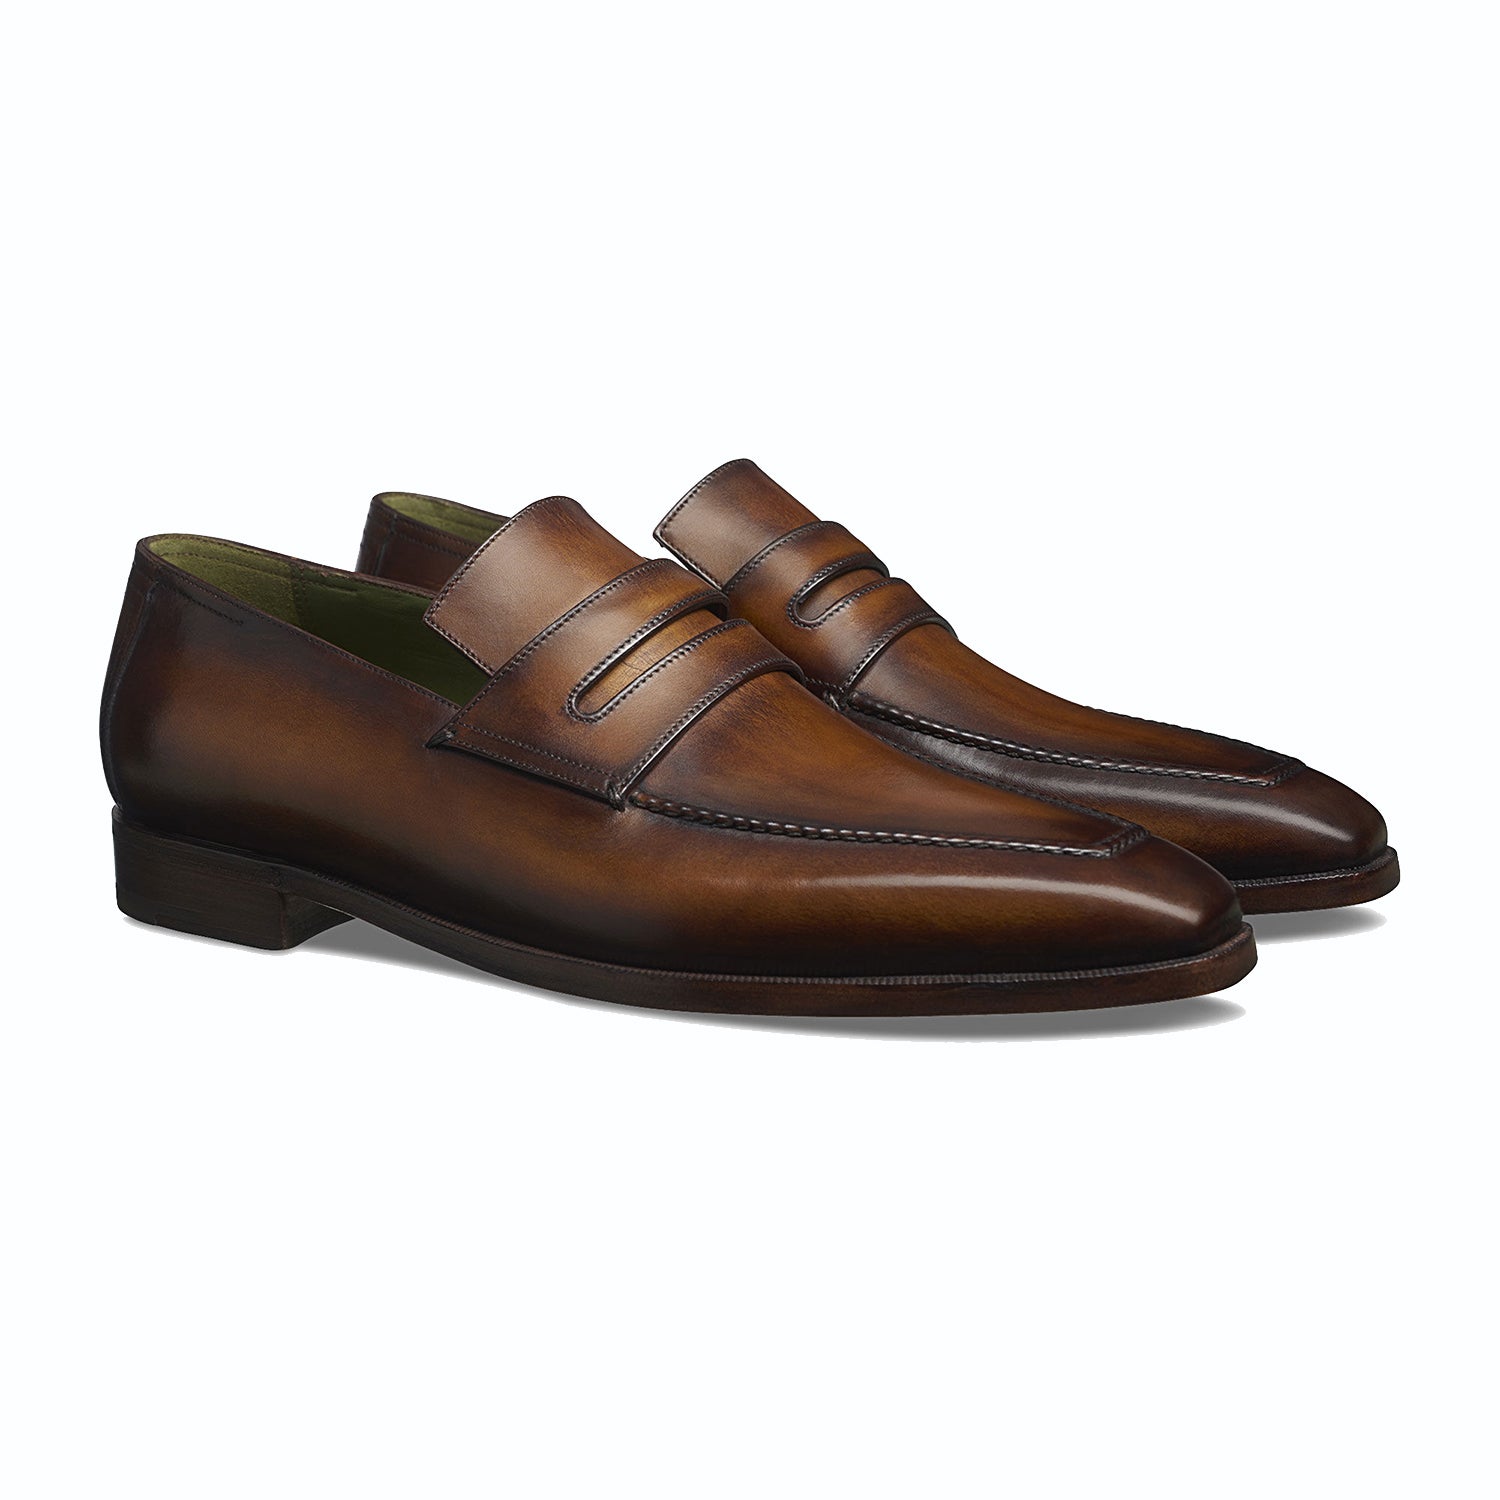 S1411 ANDY DEMESURE LEATHER LOAFER